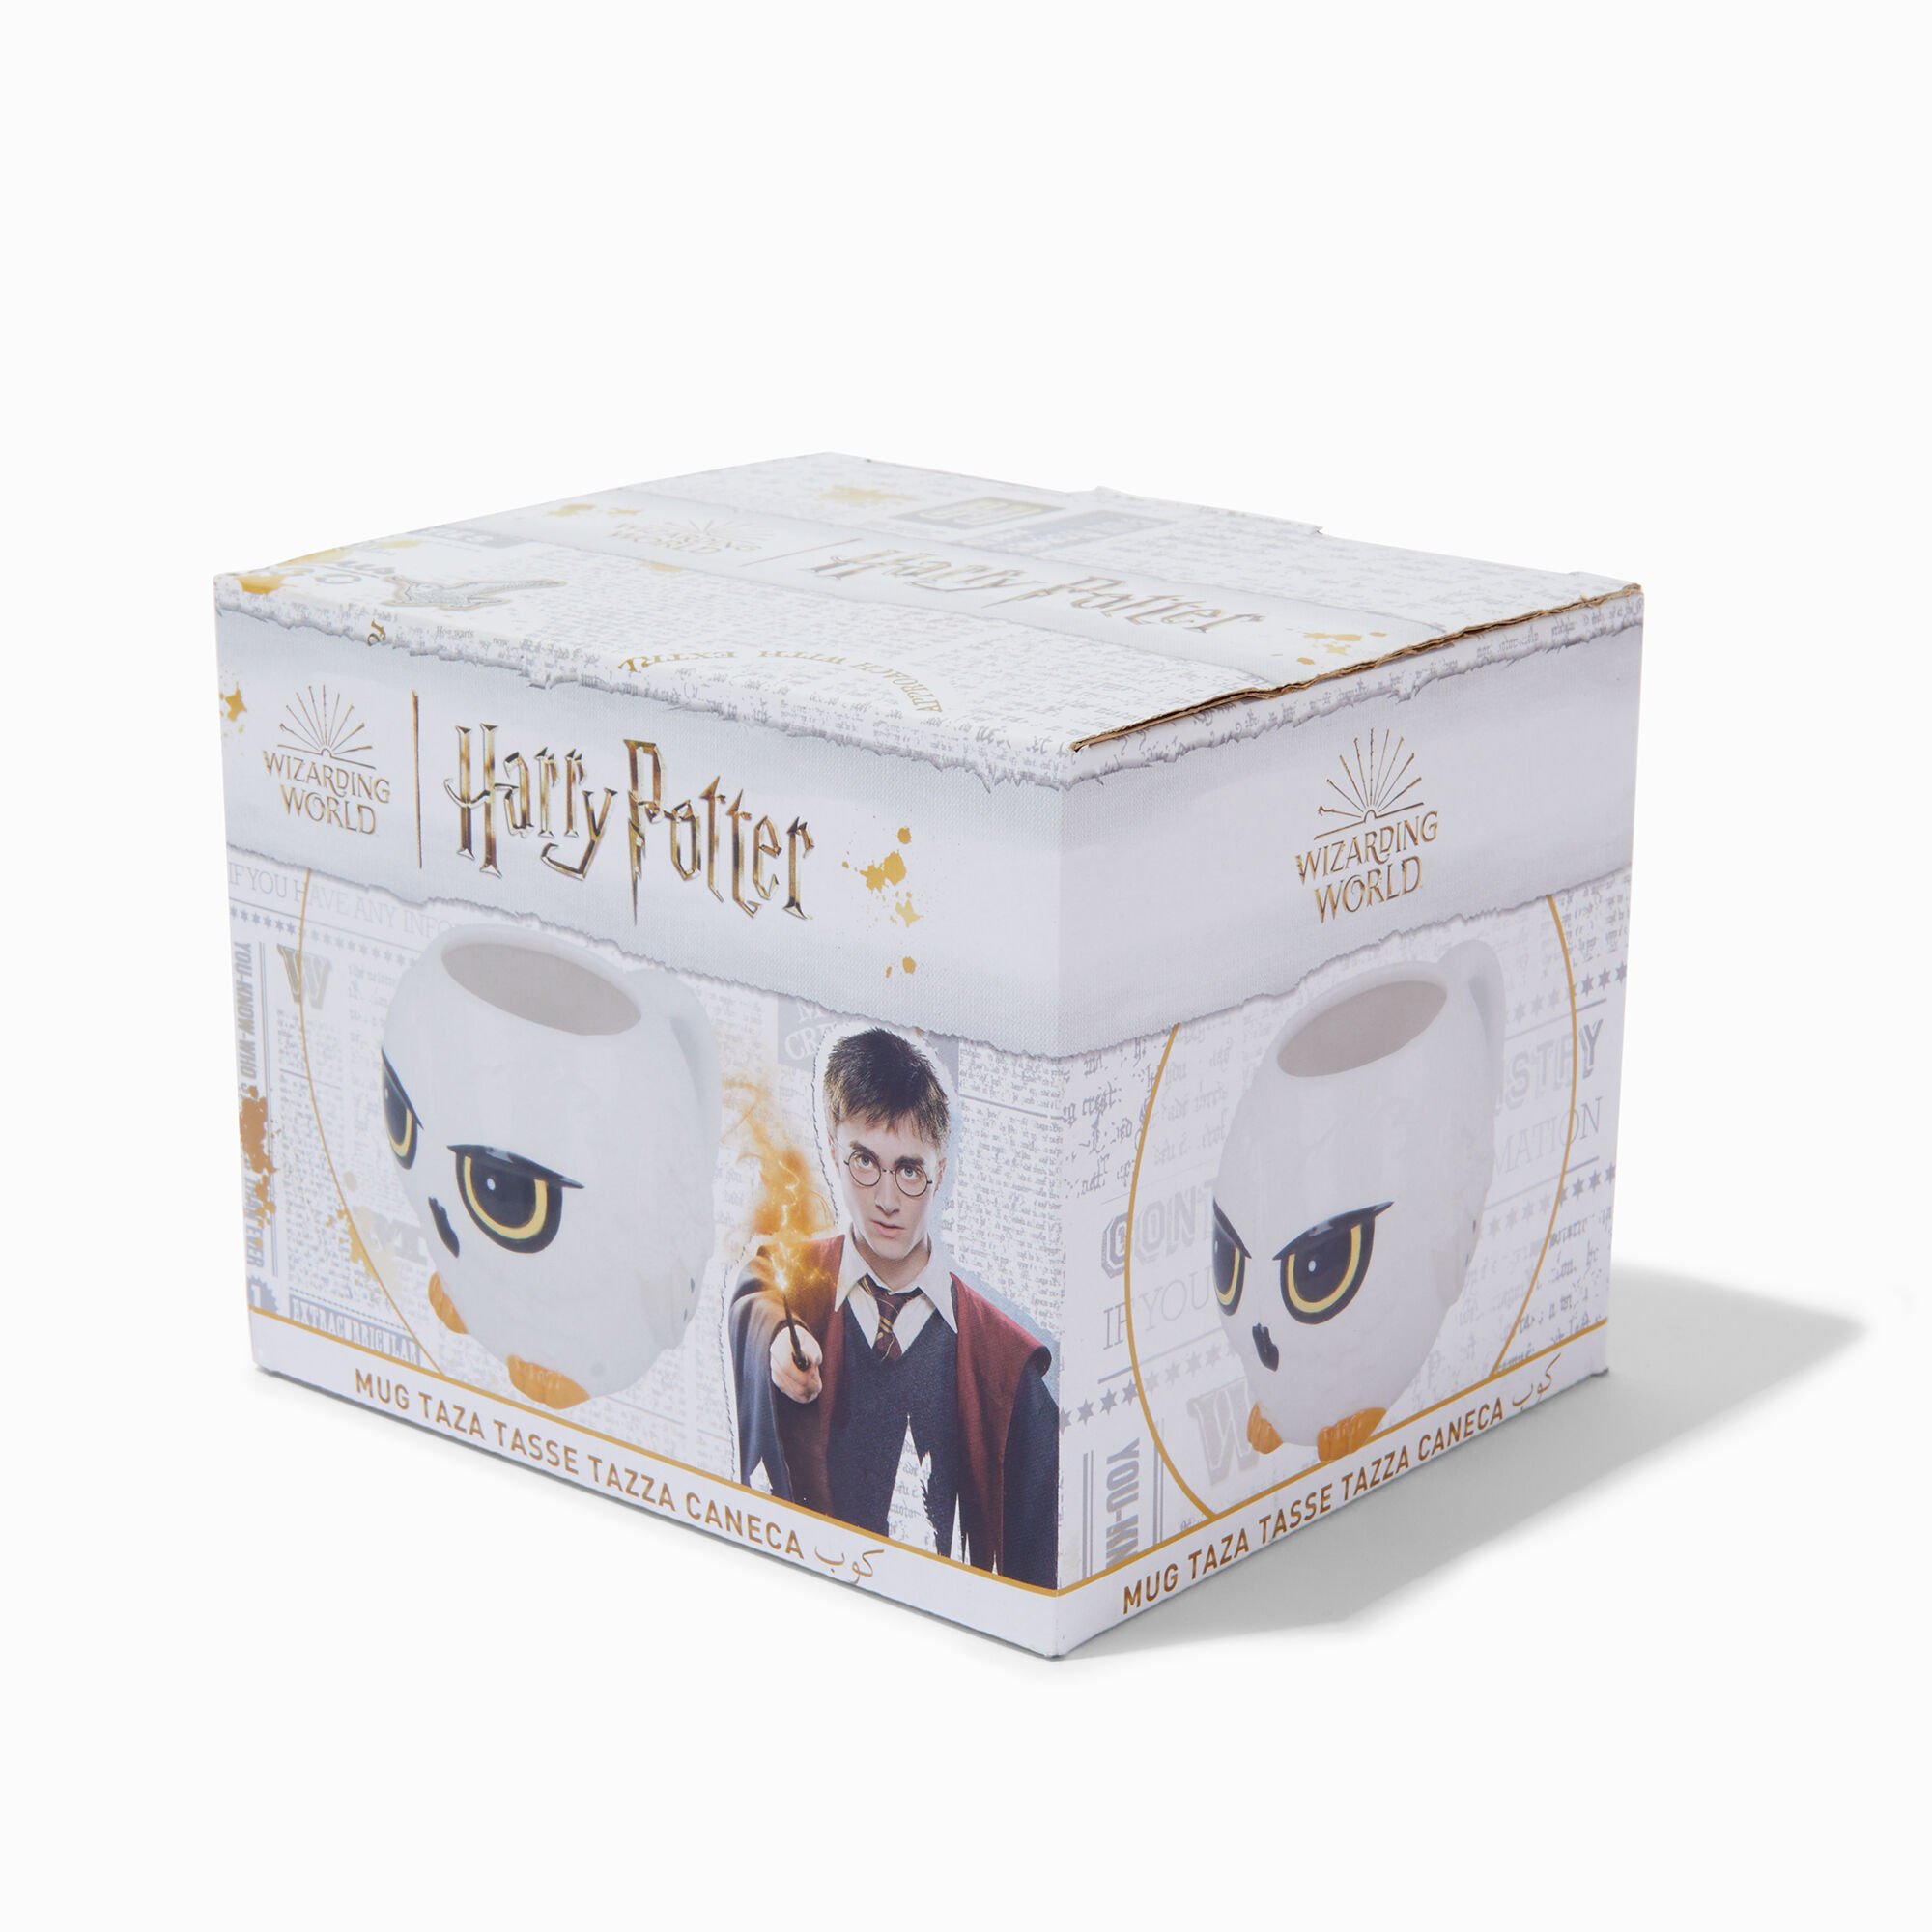 View Claires Harry Potter Wizarding World Hedwig 3D Ceramic Mug information